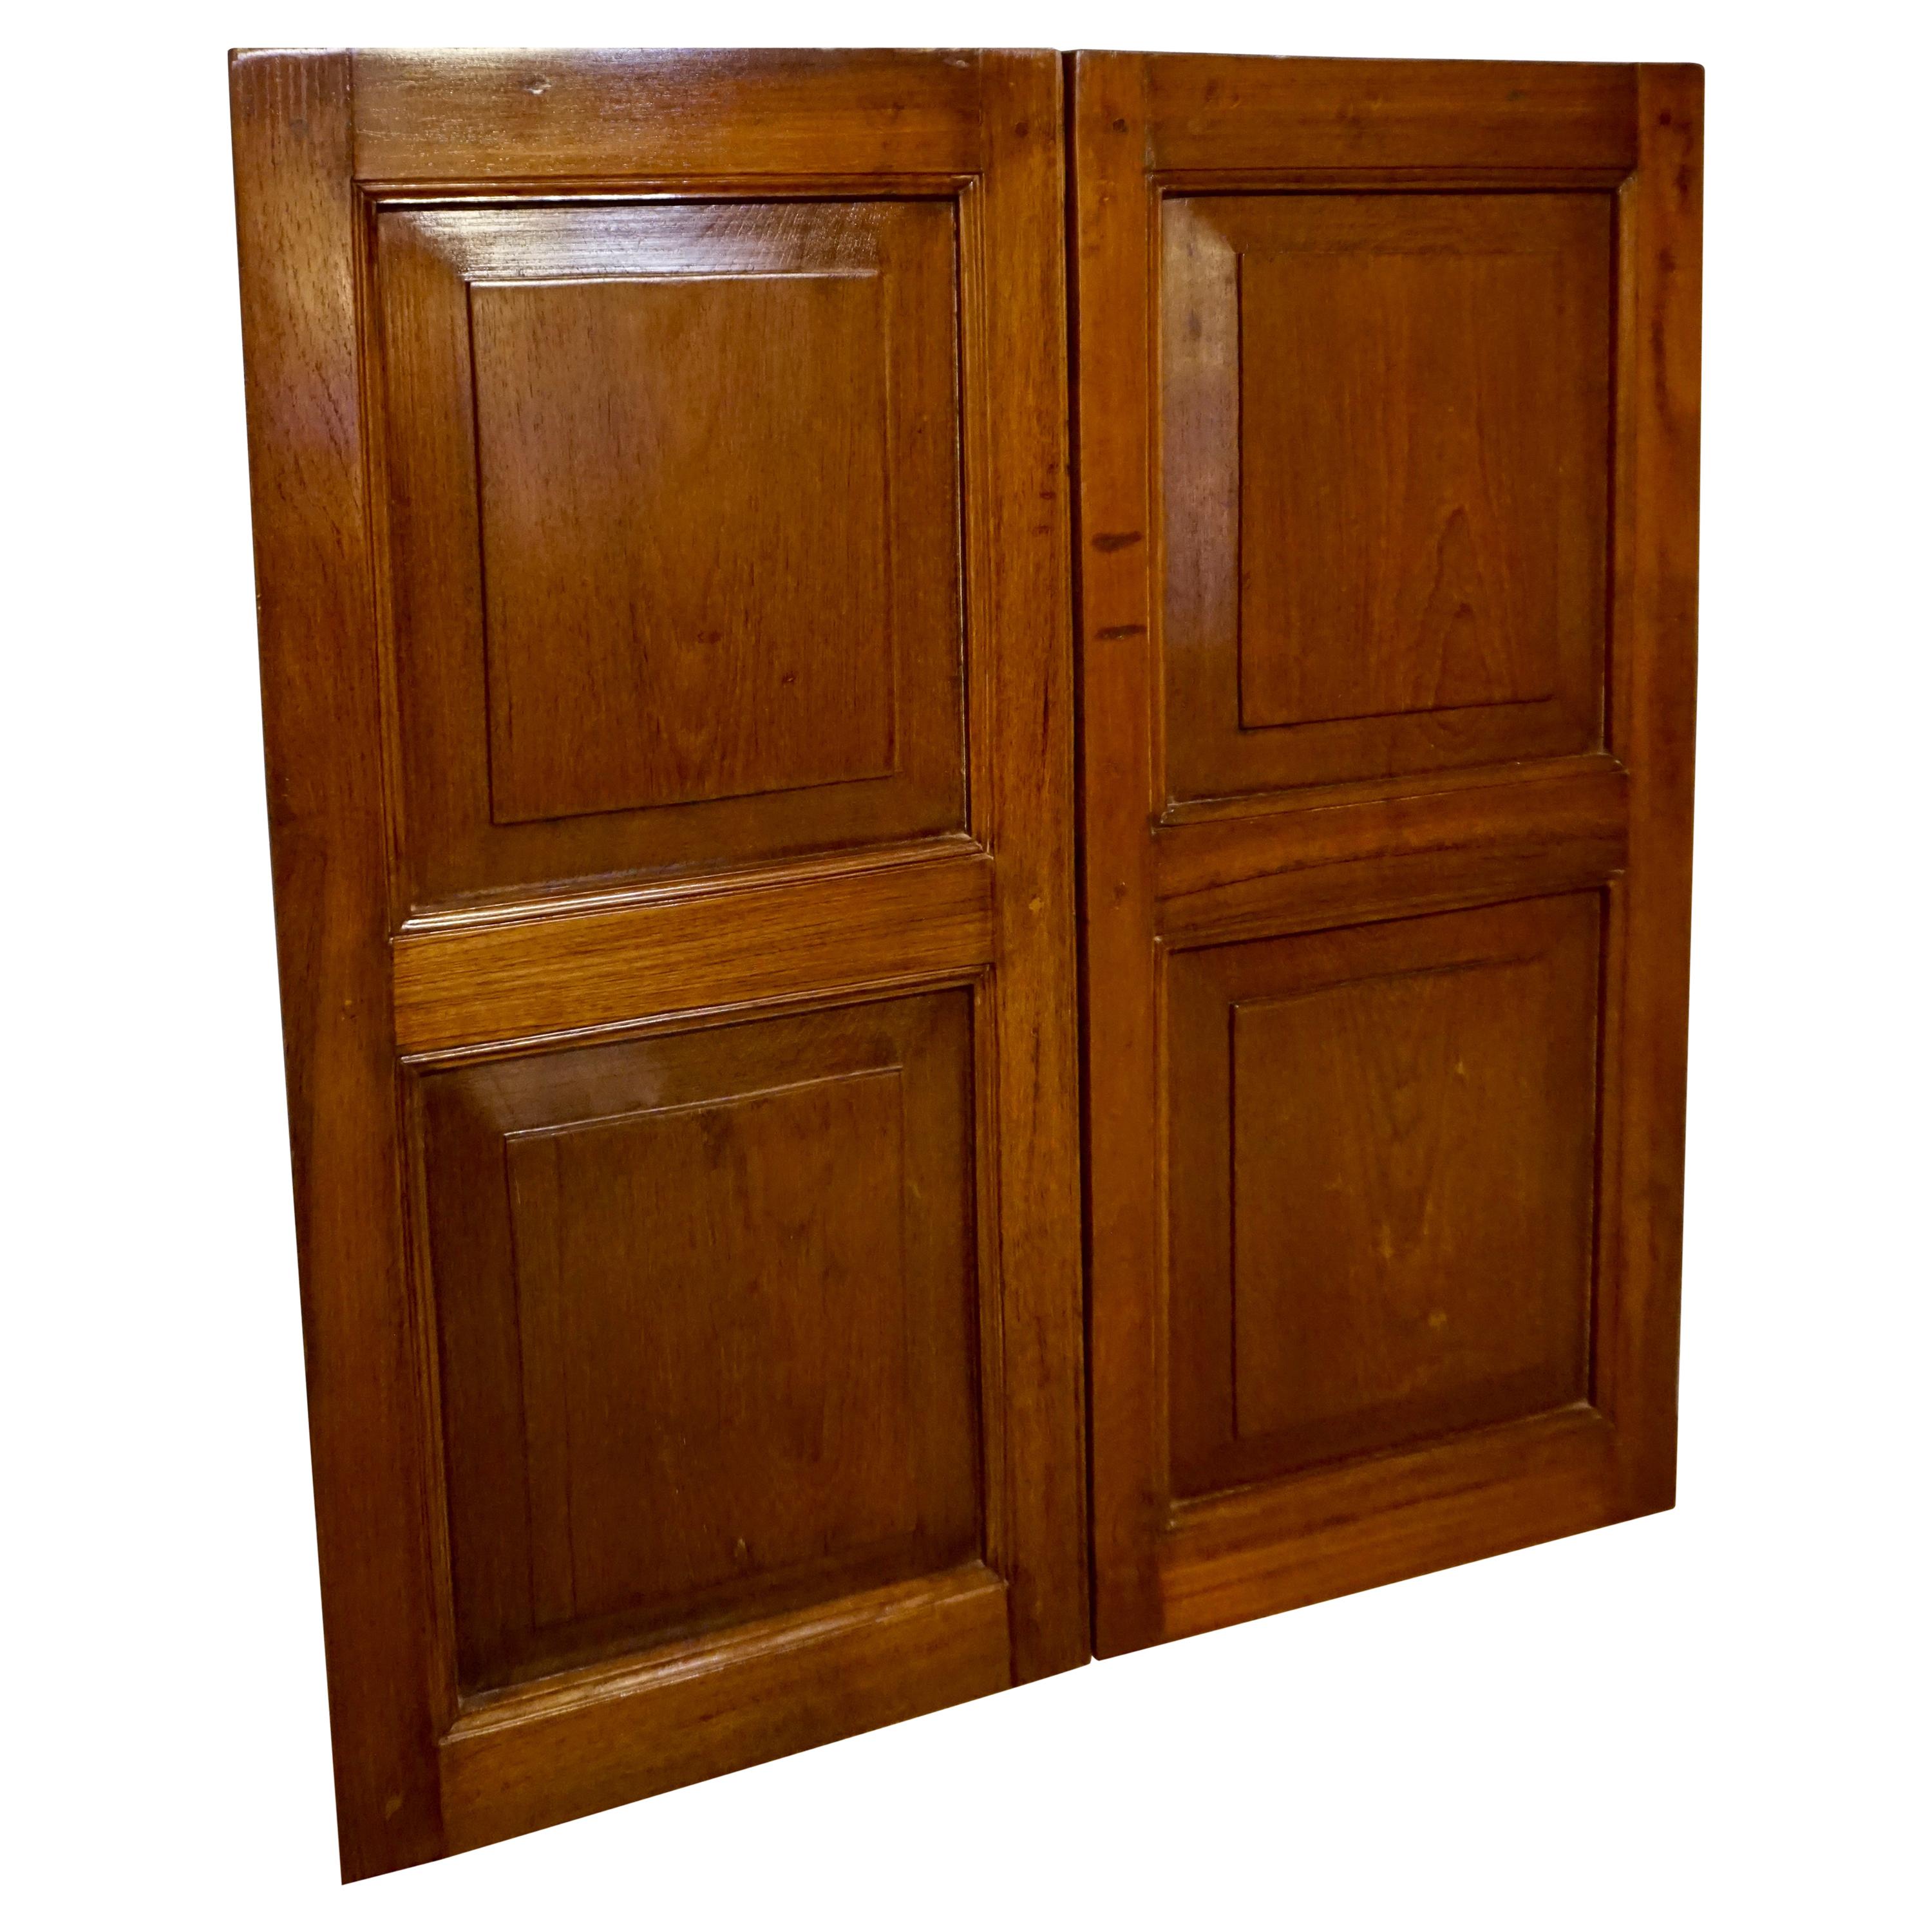 British Colonial Solid Teak Plantation Shutters with Panel Work Dovetailed For Sale